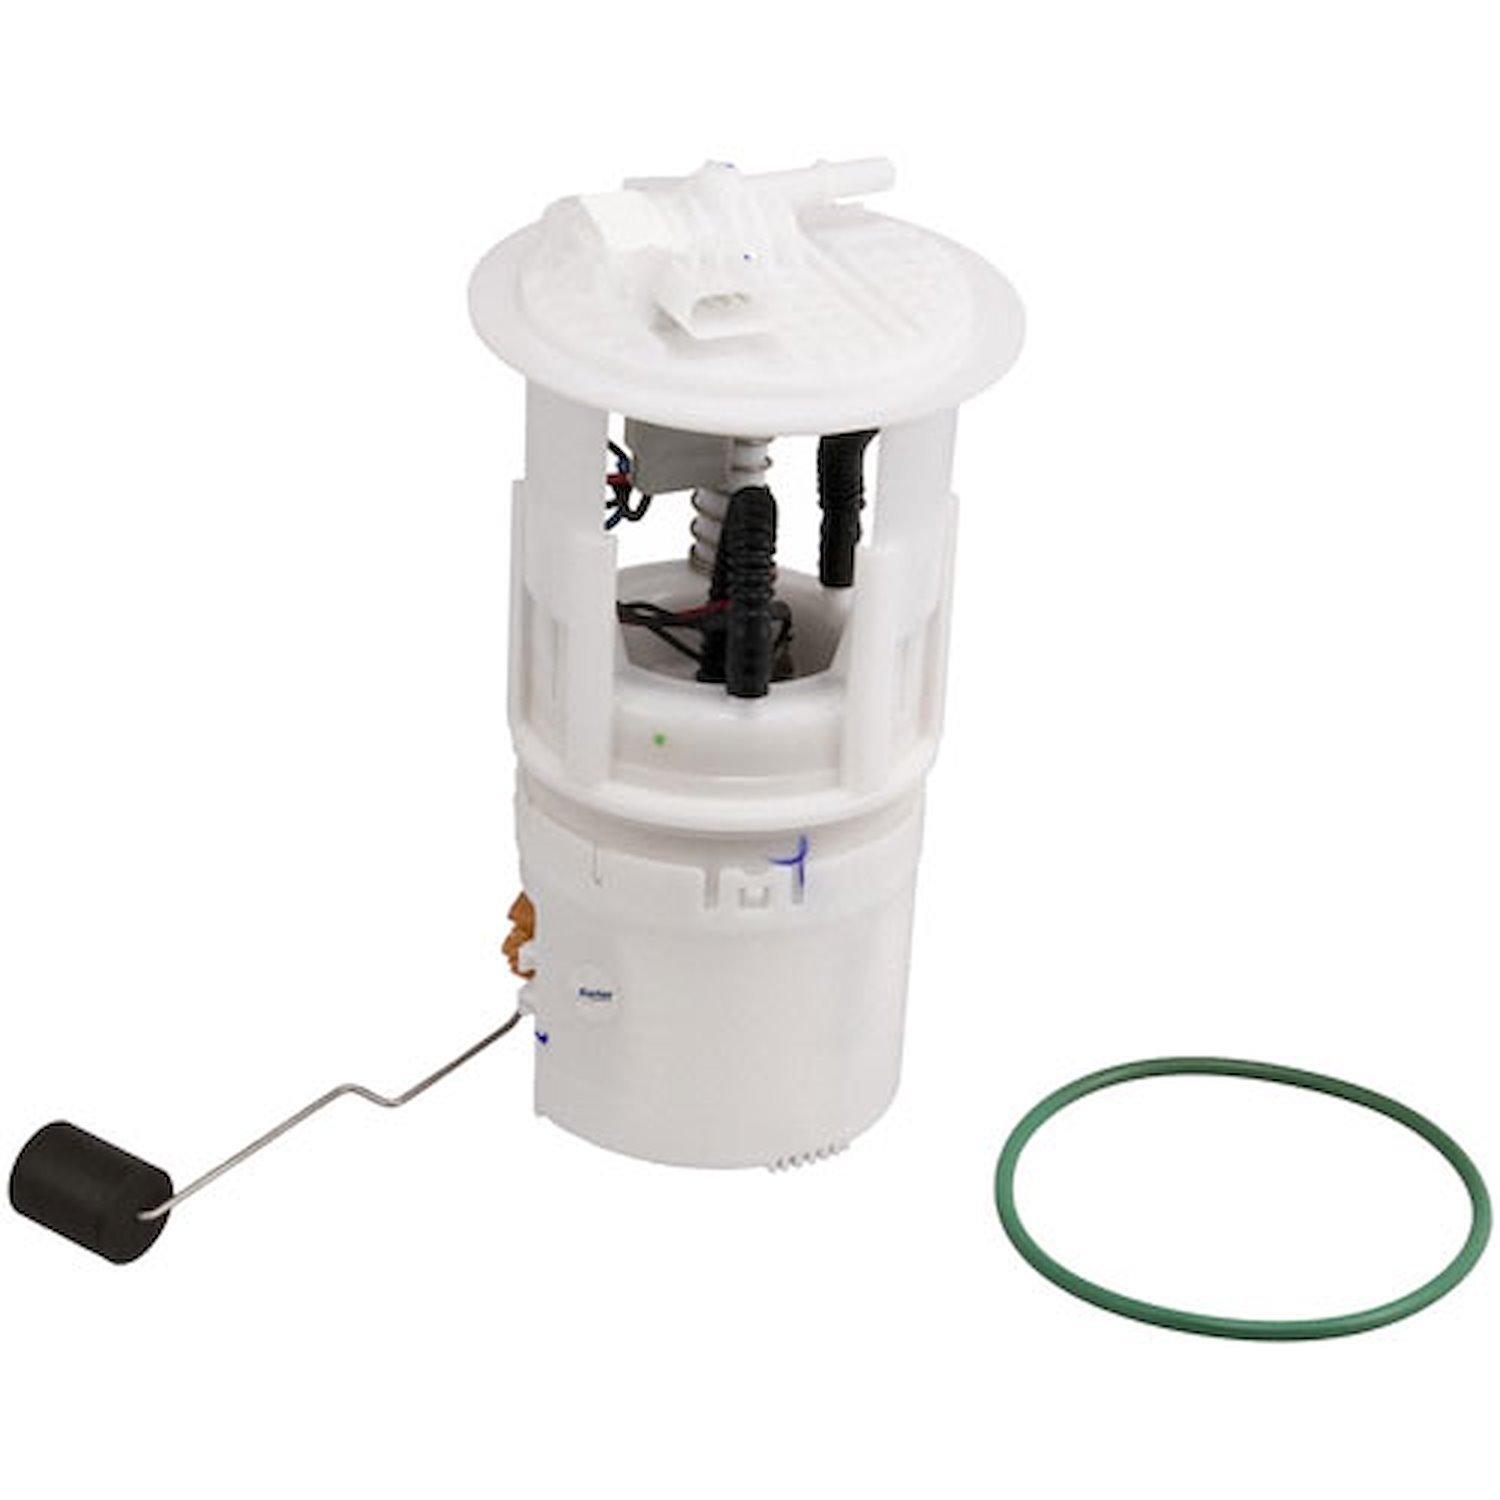 OE Chrysler/Dodge Replacement Electric Fuel Pump Module Assembly 2005-10 Chrysler PT Cruiser 2.4L 4 Cyl